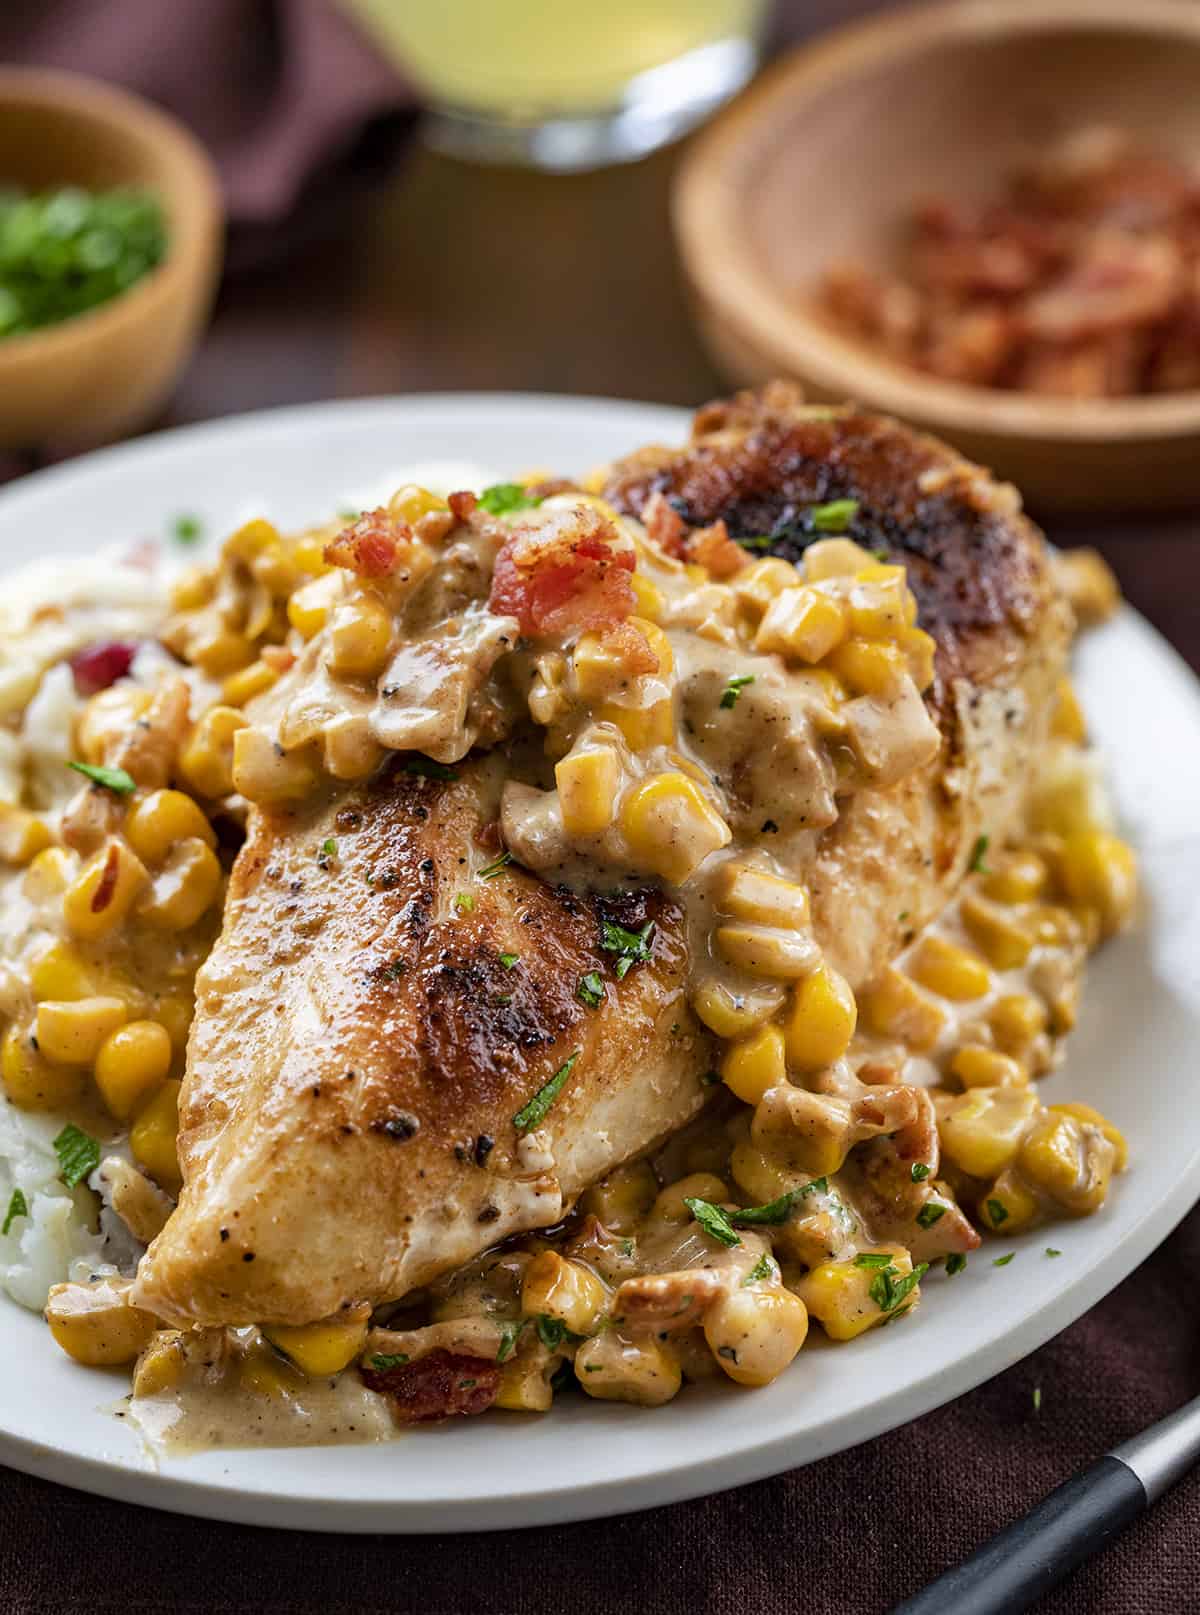 Plate with Mashed Potatoes and Chicken Bacon Creamed Corn. Dinner, Supper, Chicken, Chicken Recipes, Chicken with Creamed Corn, Garlic Butter Creamed Corn Chicken, Dinner Ideas, homestead recipes, recipes, i am homesteader, iamhomesteader